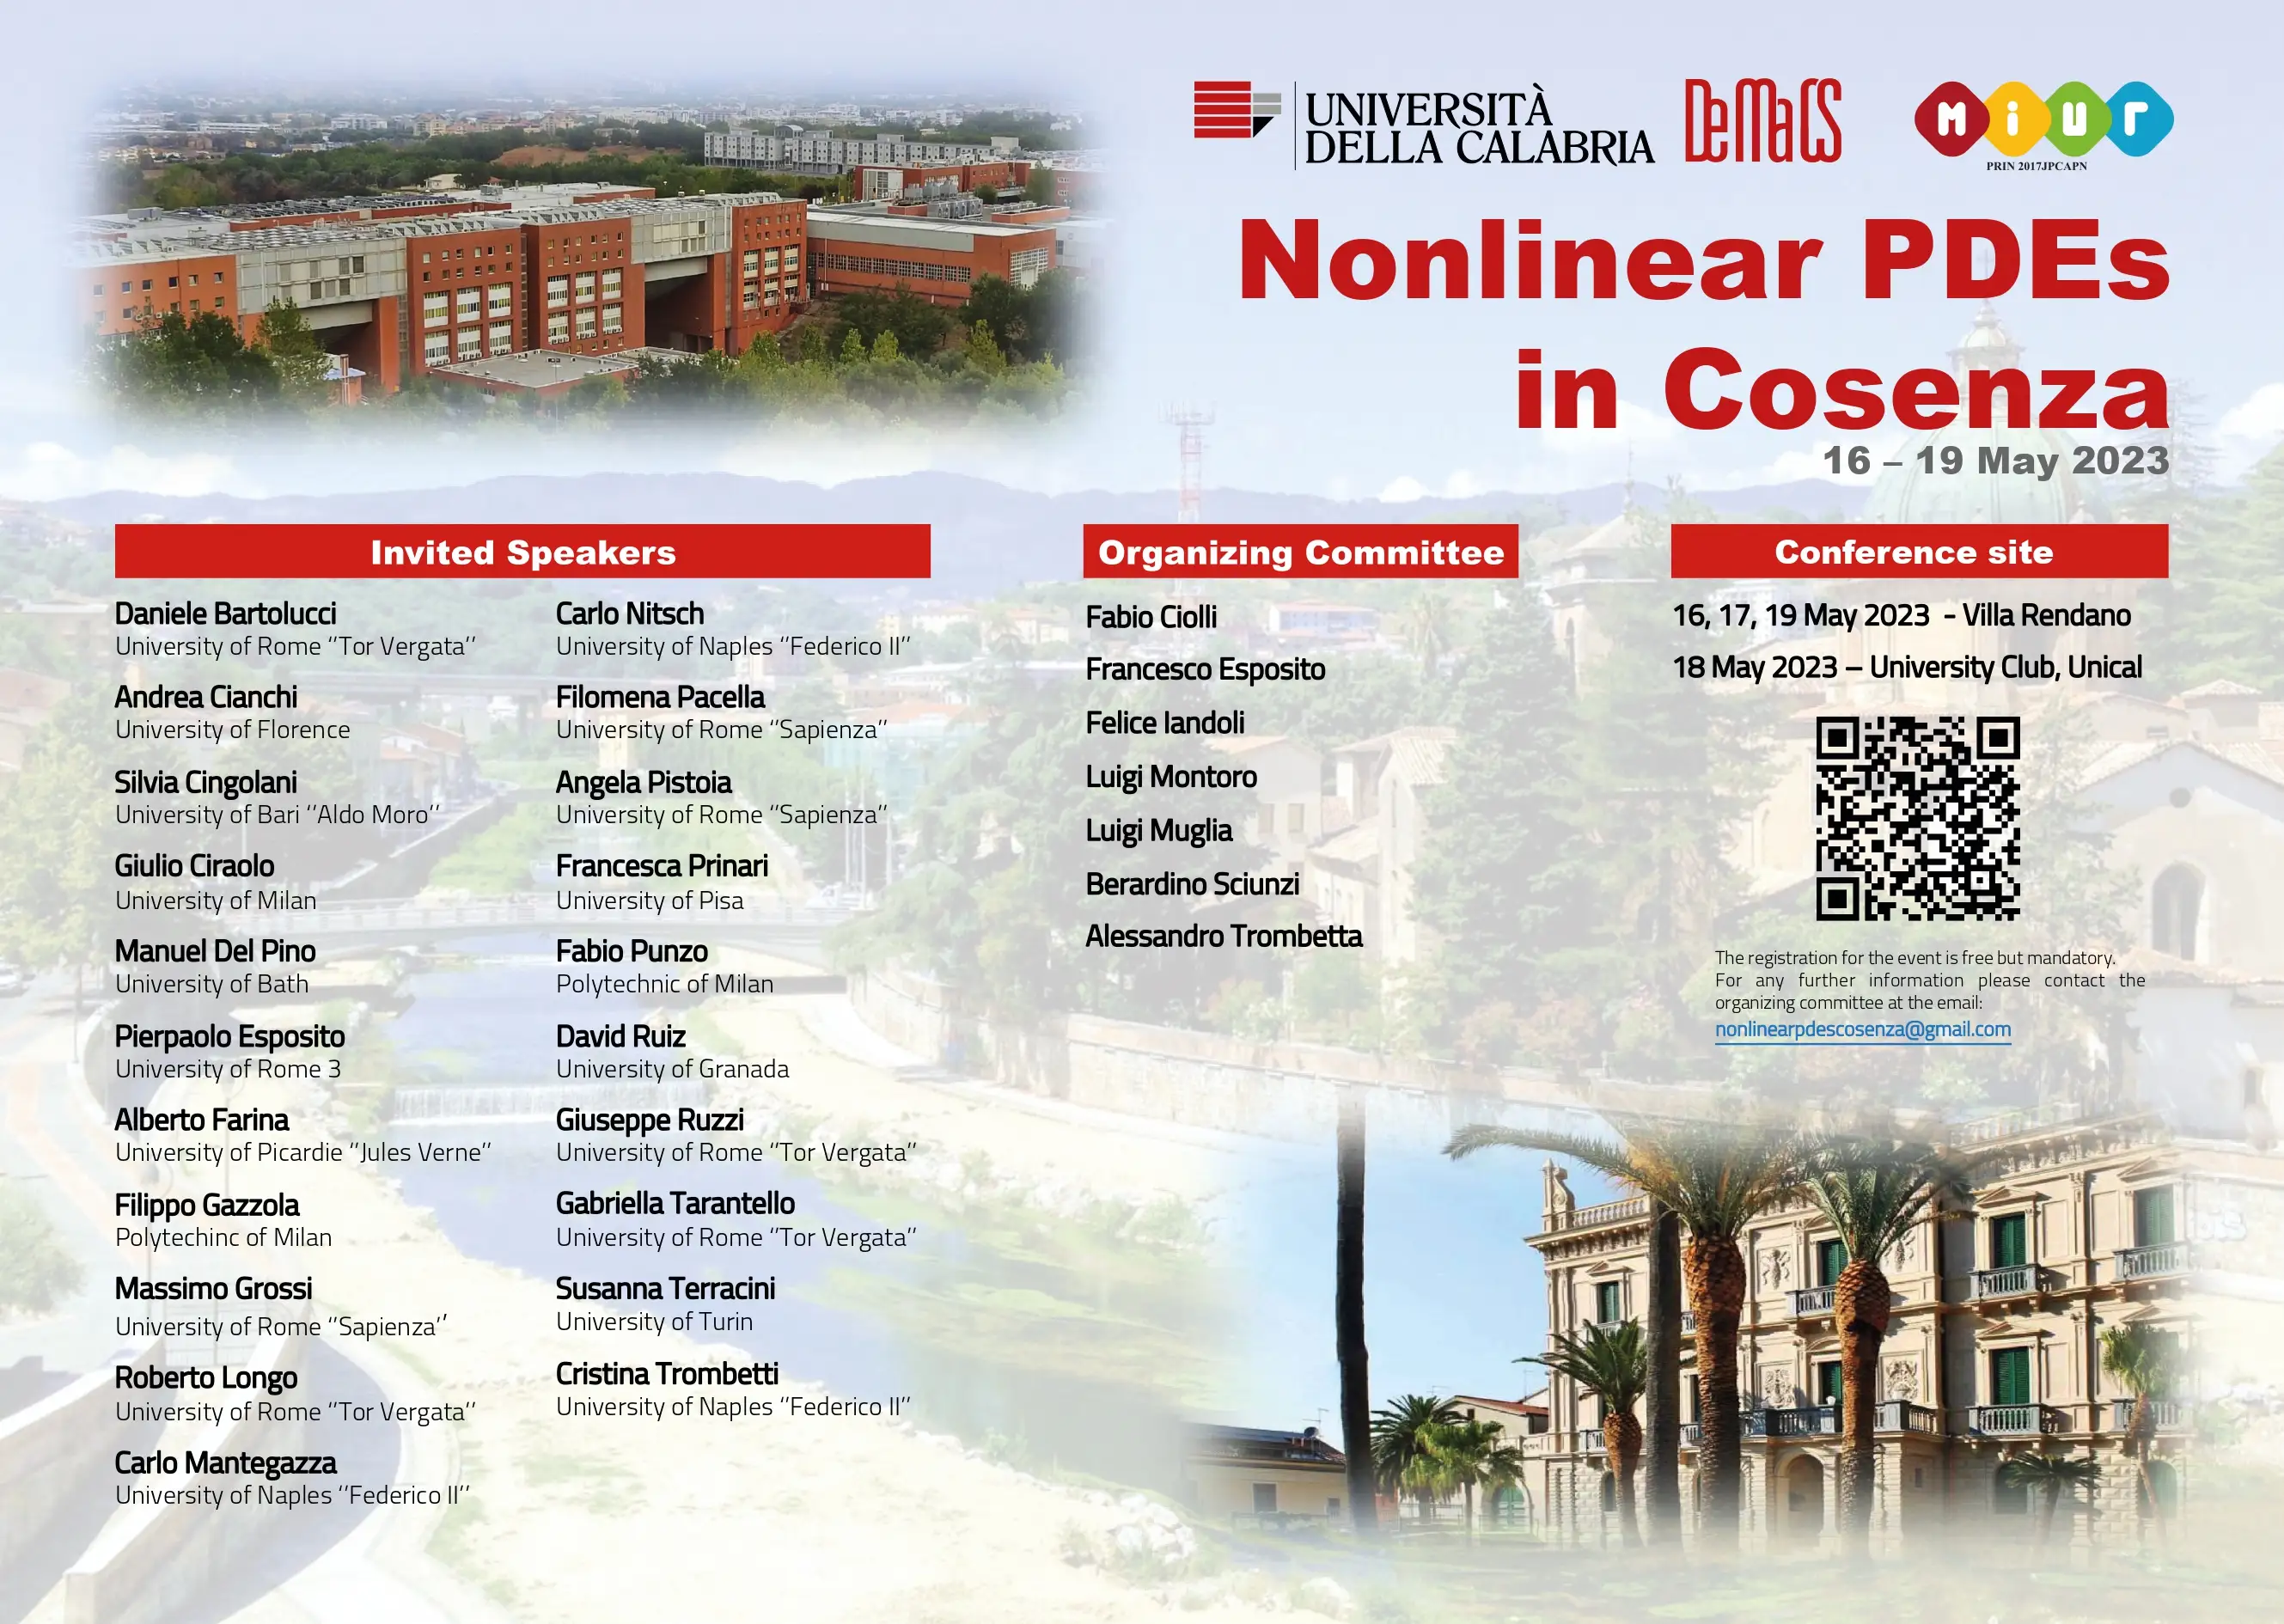 Convegno "Nonlinear PDEs in Cosenza" 16-19 may 2023 - DeMaCS